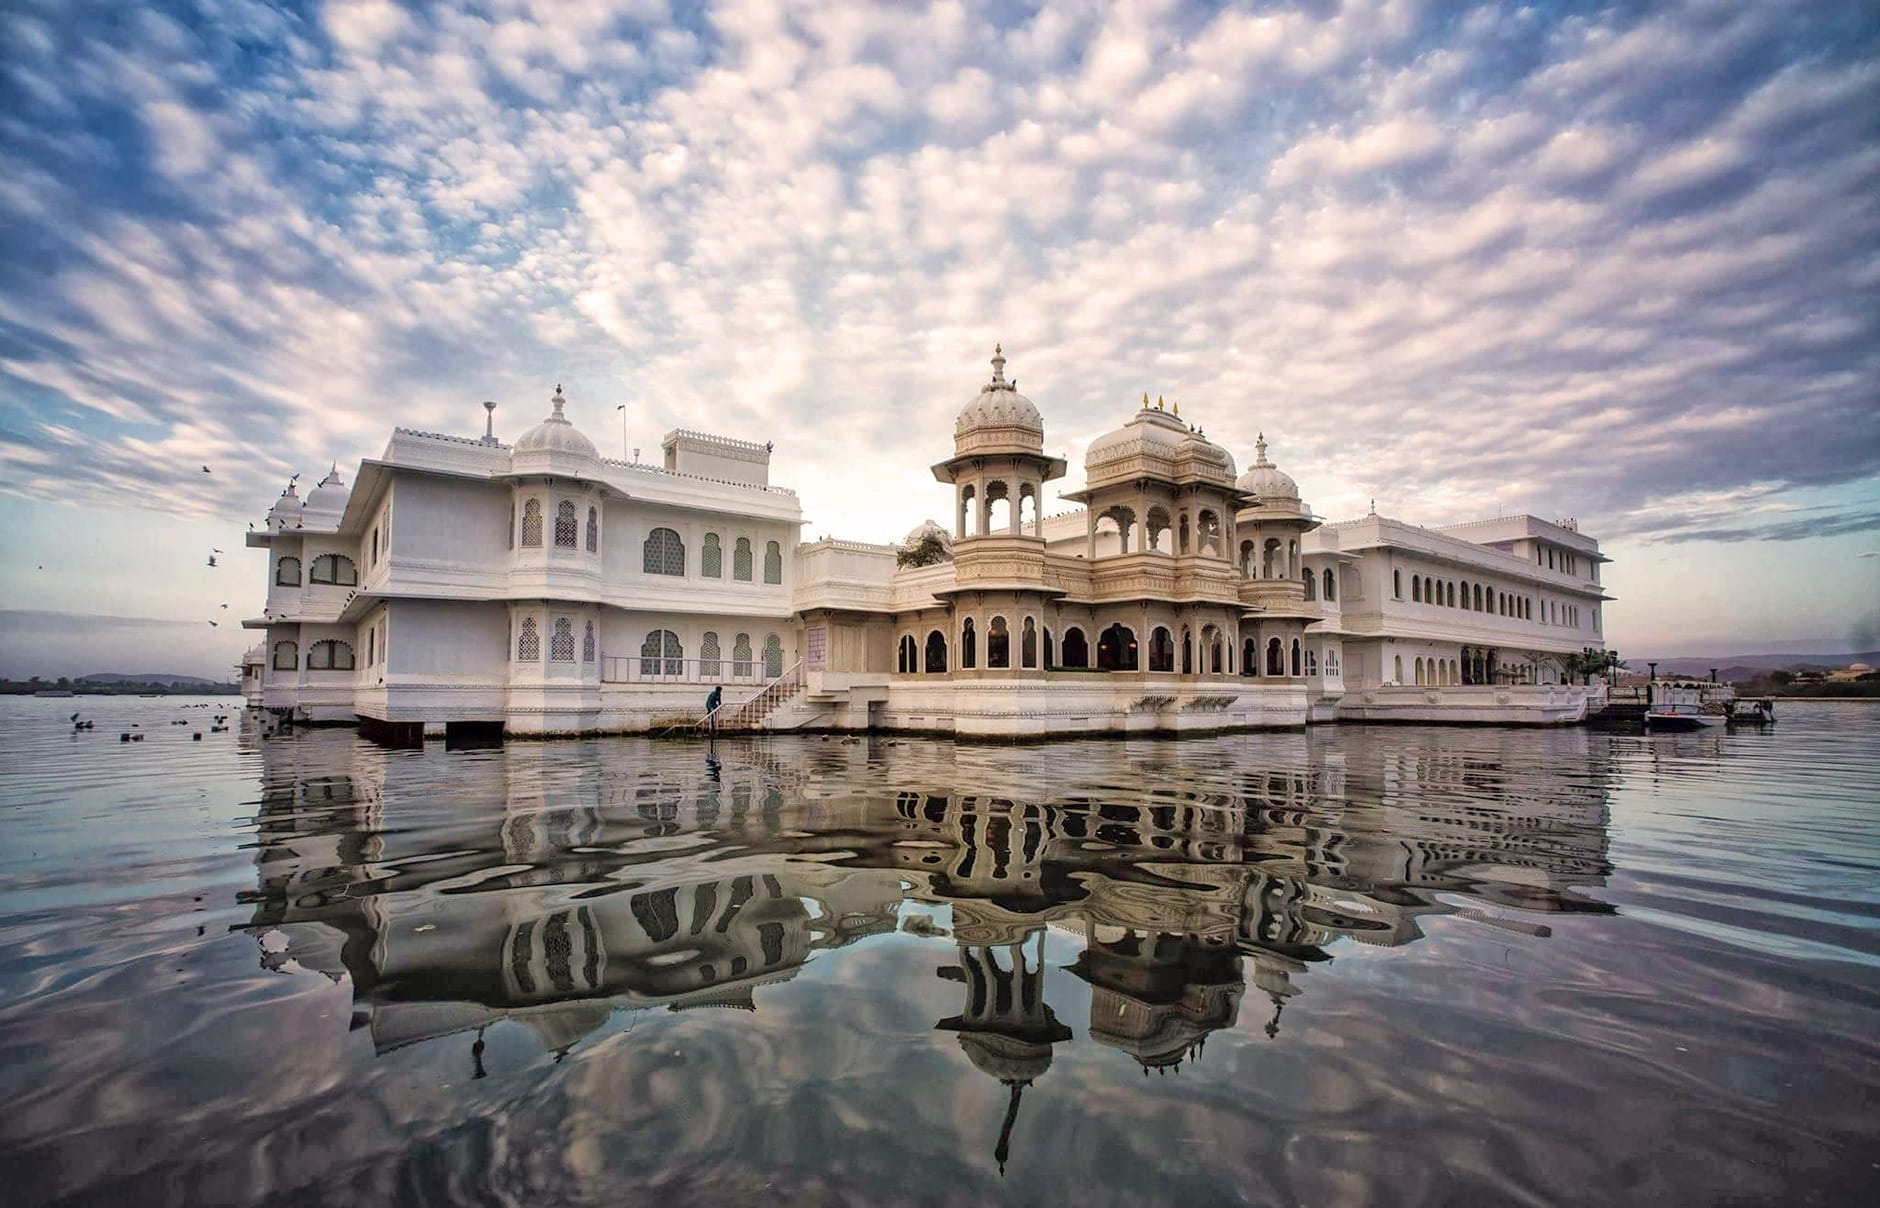 Scenic places in Udaipur that can up your social media game!